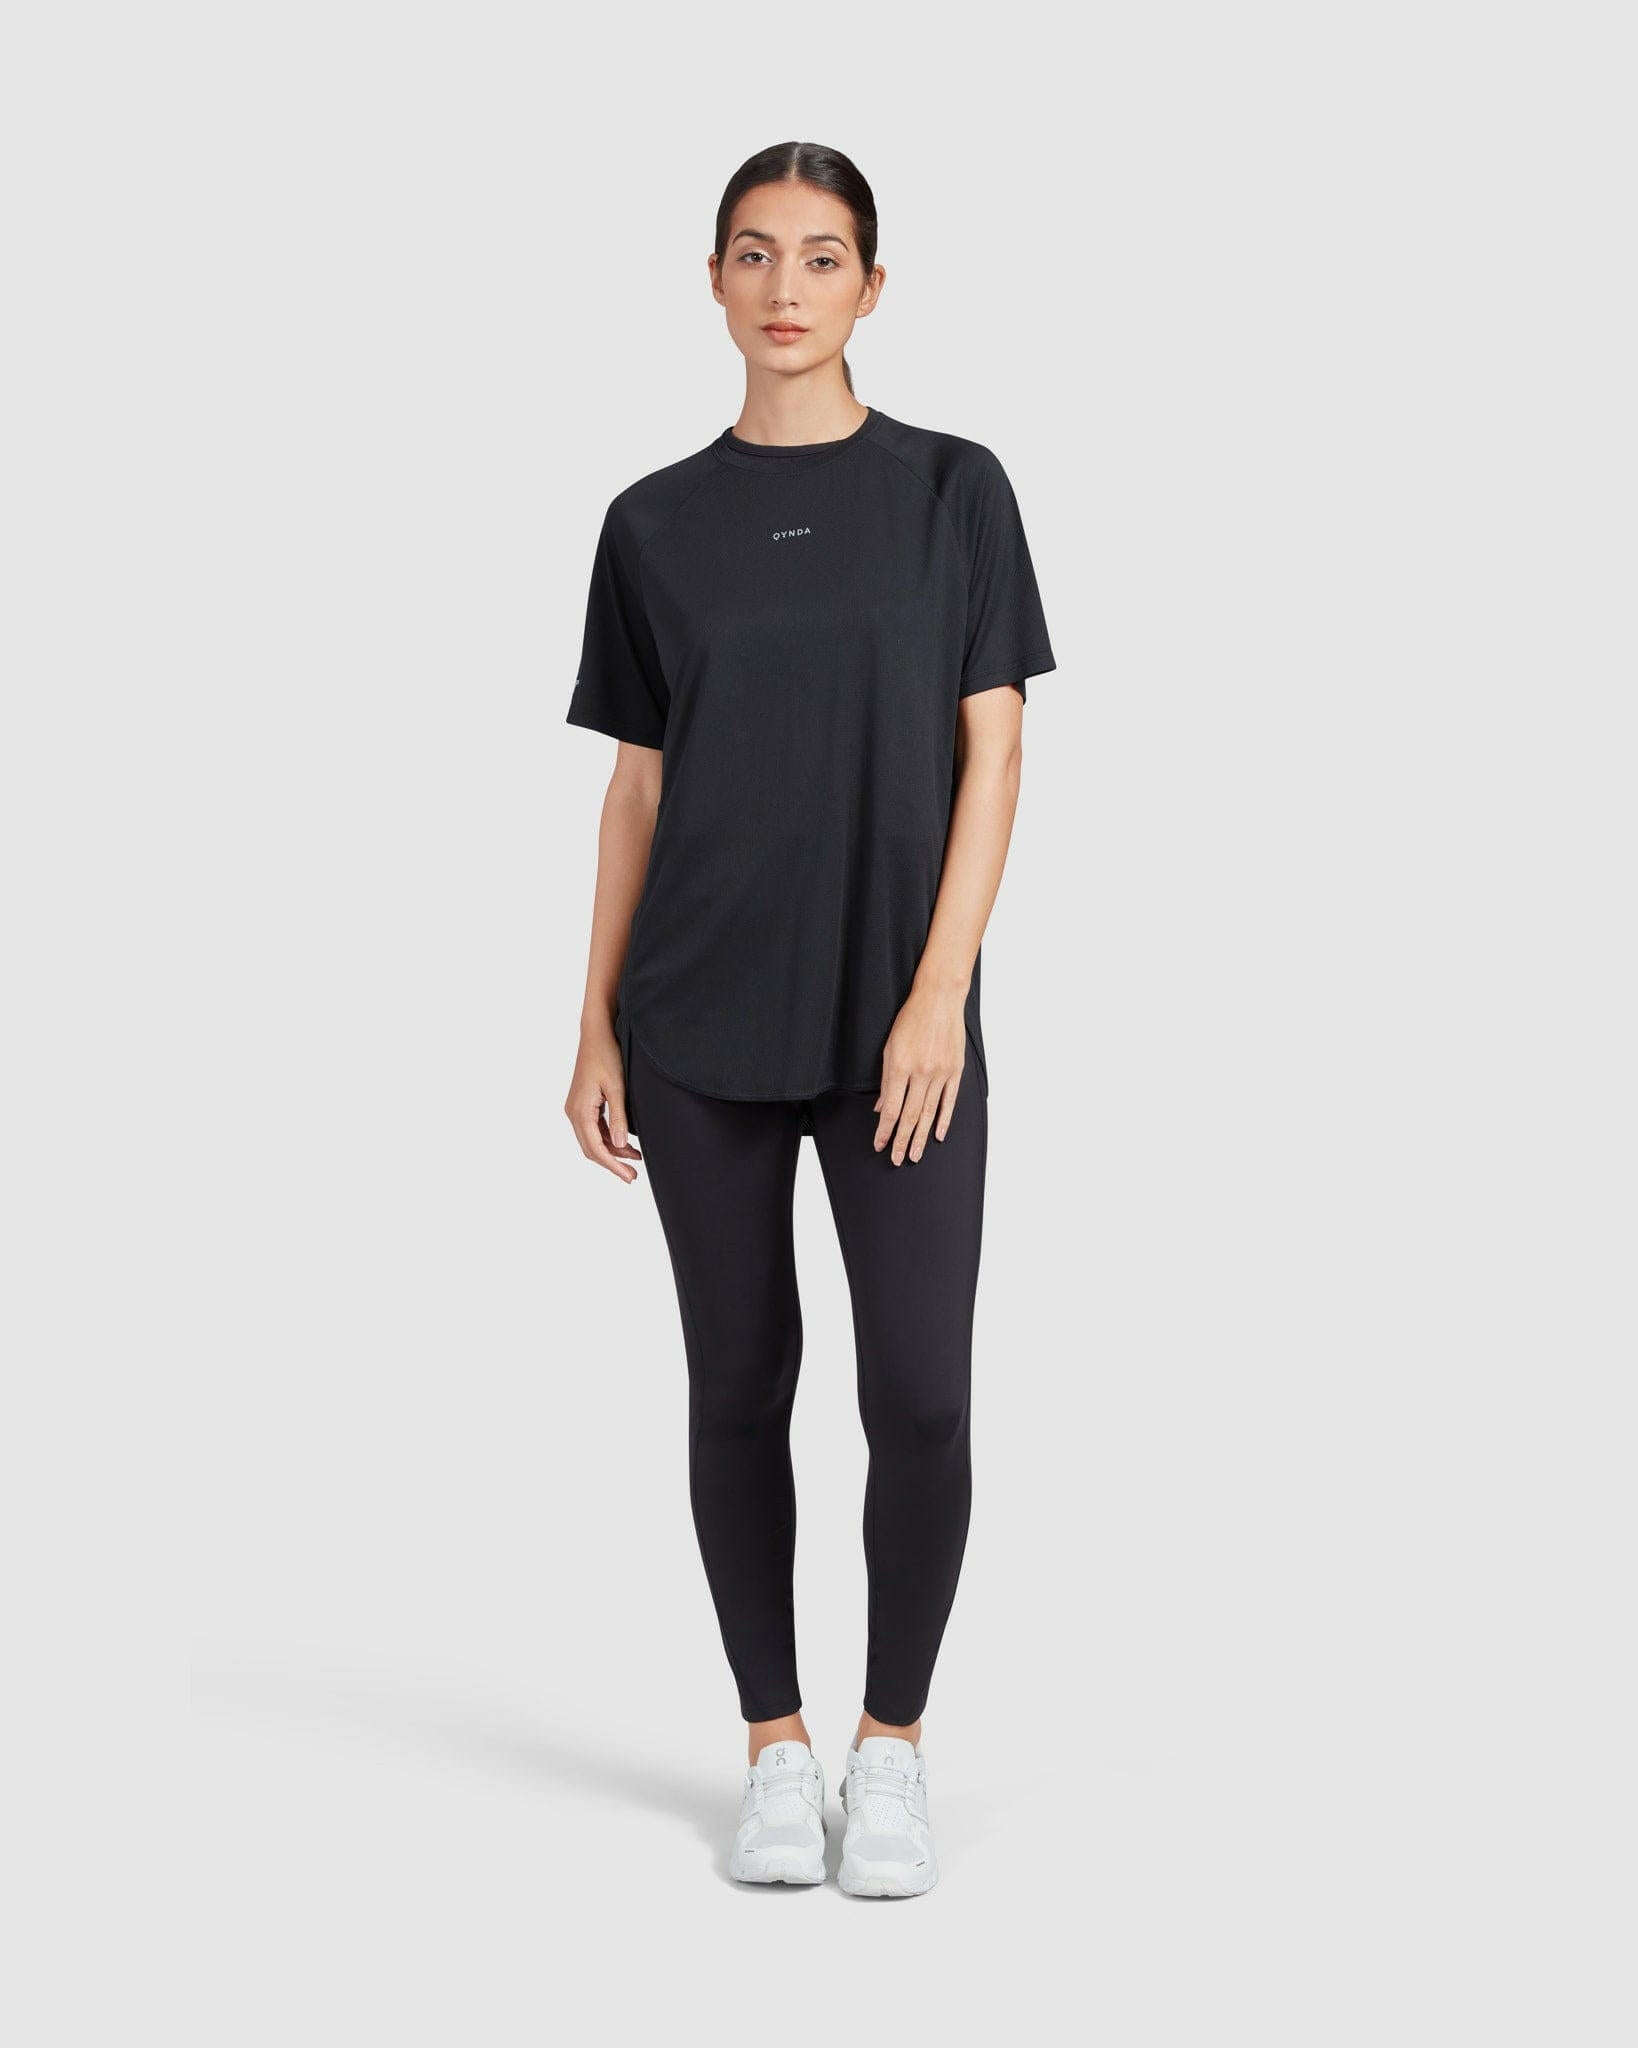 A woman stands against a white background, wearing a casual black short sleeve BREATHE T-SHIRT by Qynda, black leggings, and white sneakers designed for breathability and running, looking straight ahead with a neutral expression.